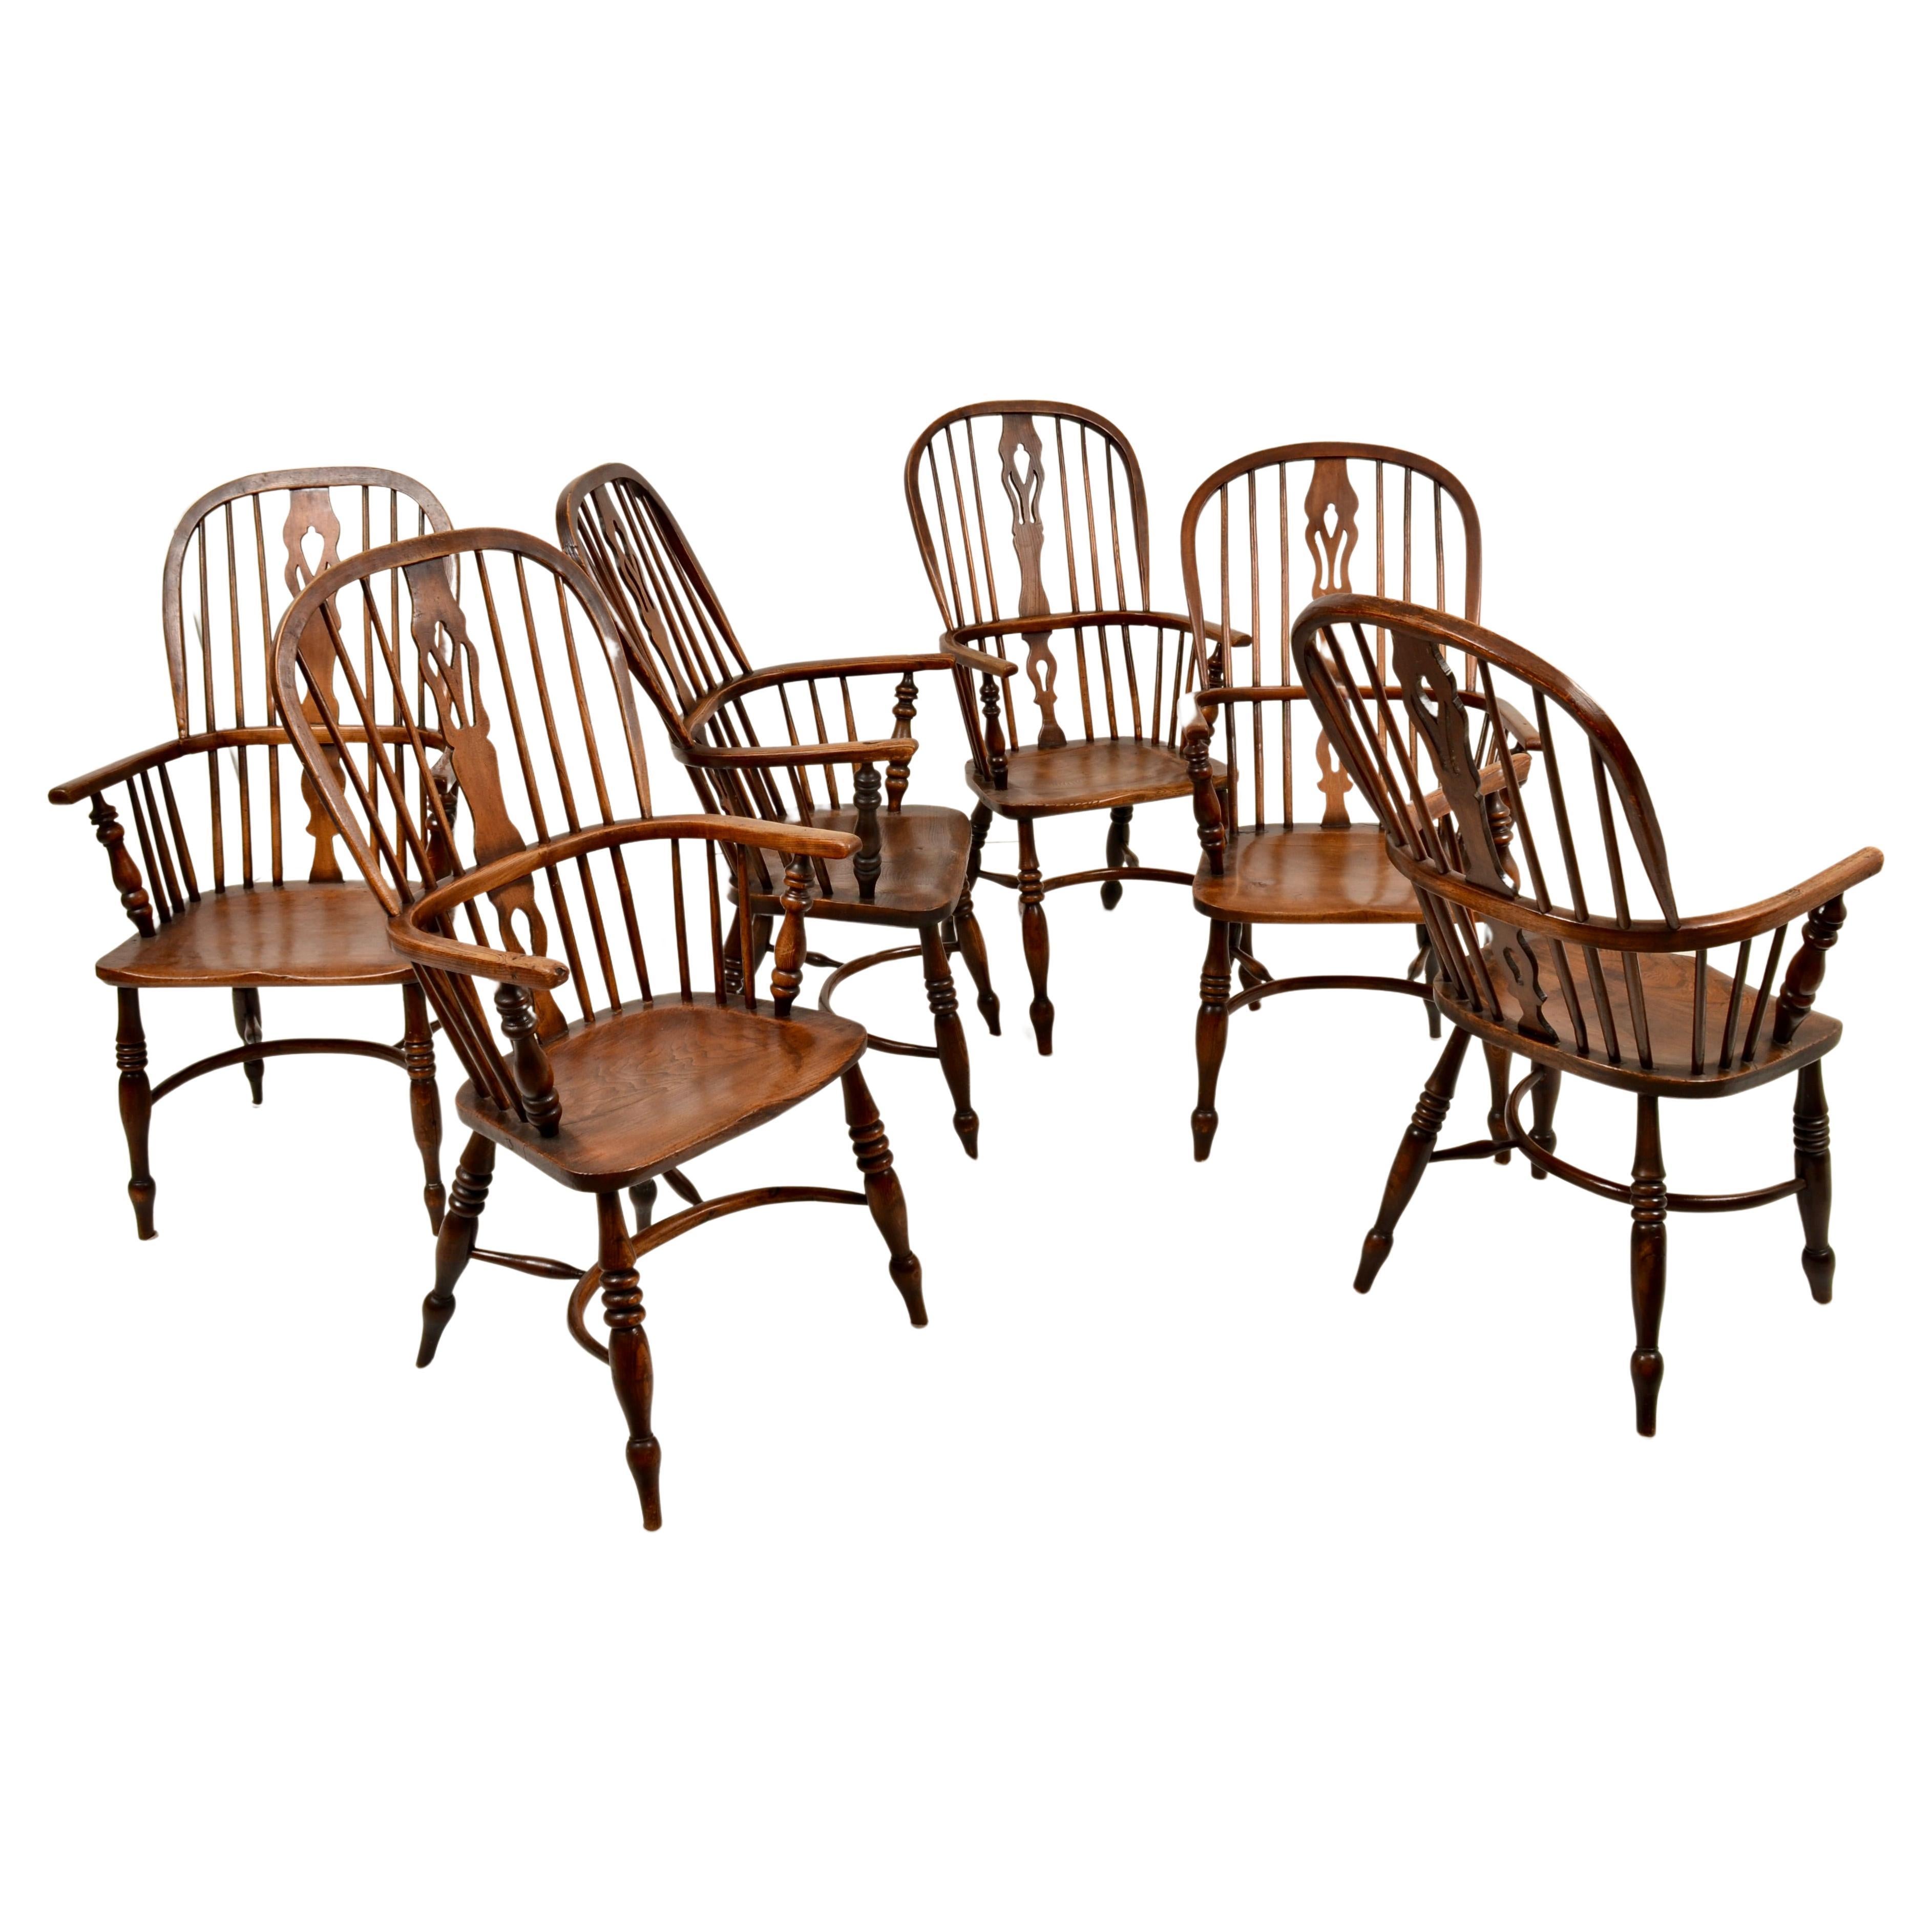 19th C English Oak Windsor Chairs - Set of Six For Sale